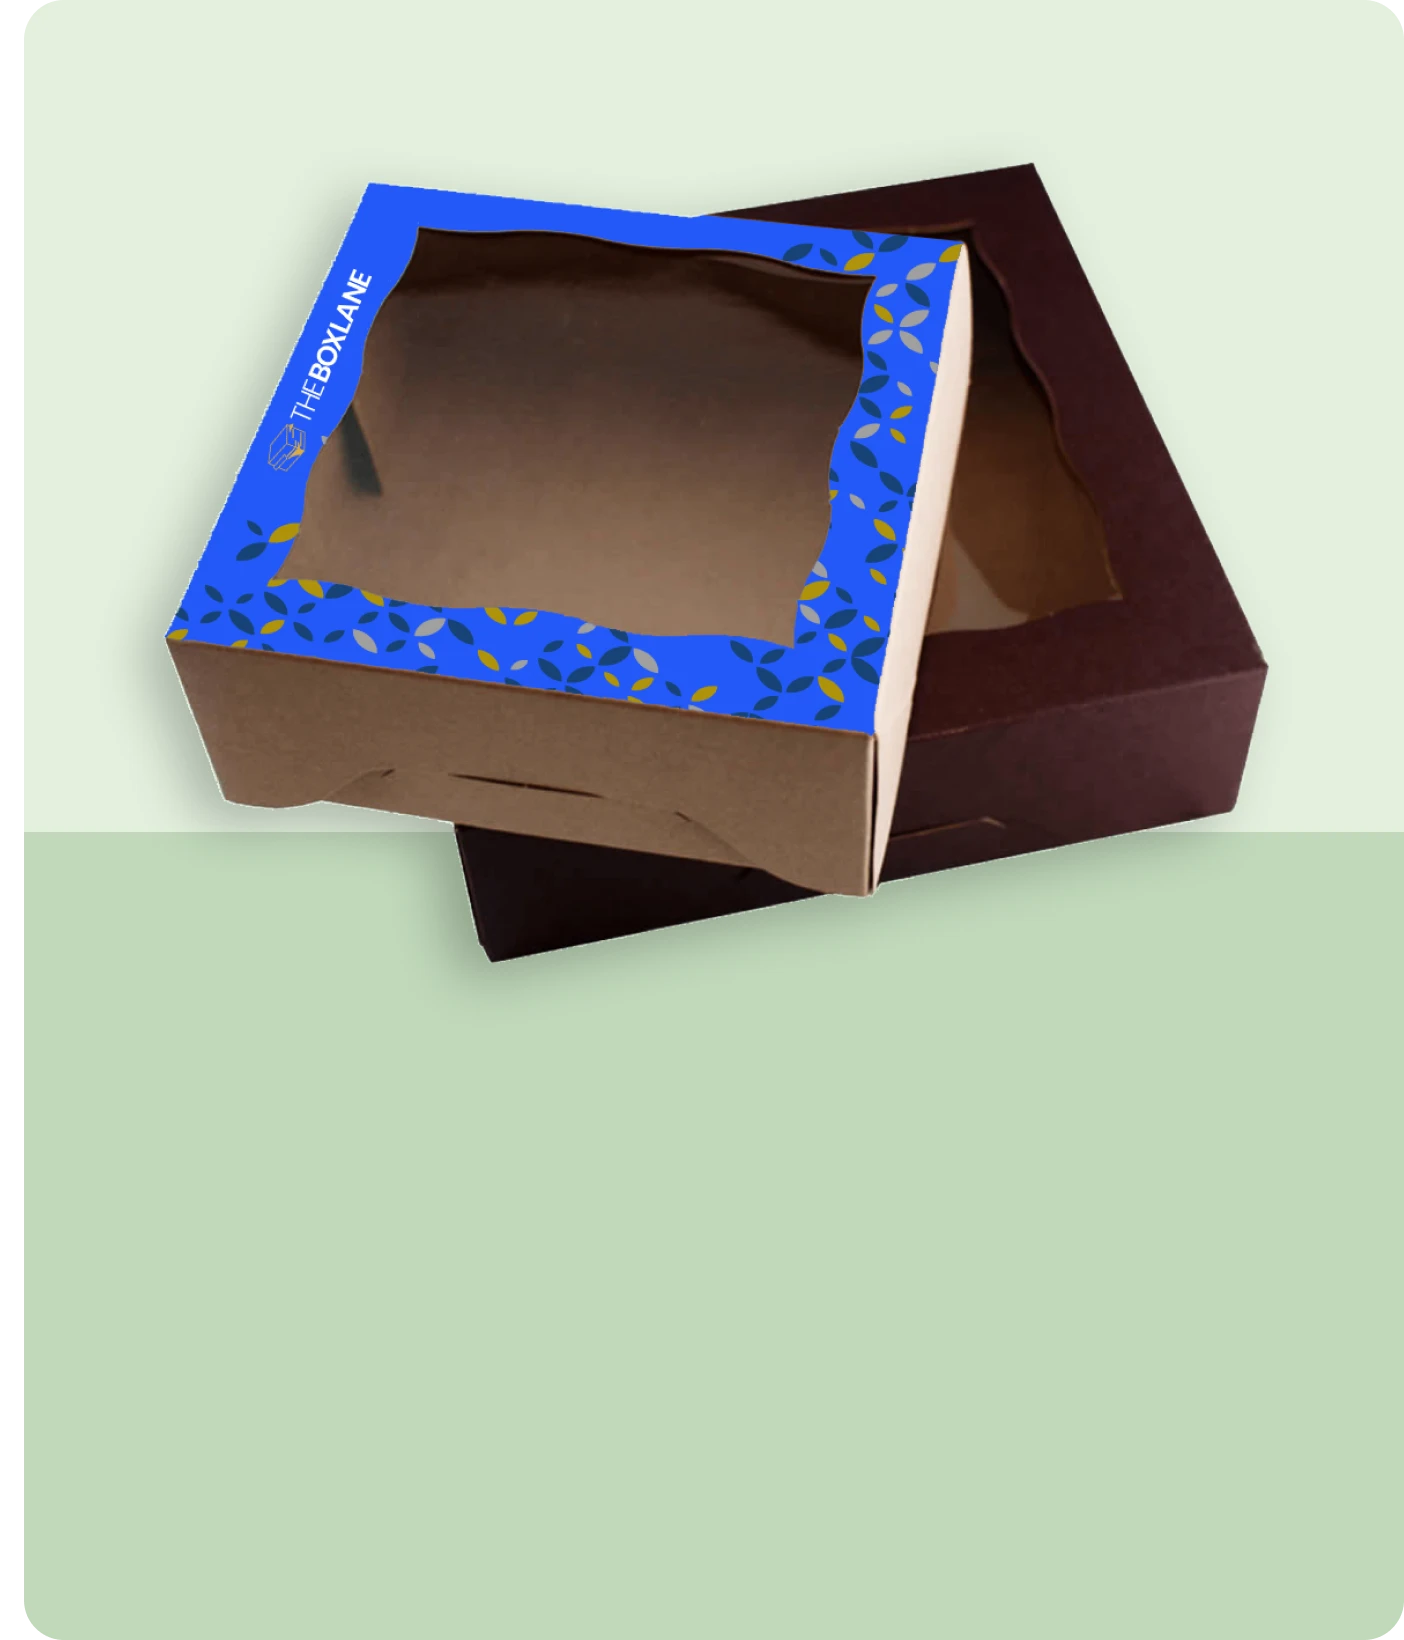 Cardboard Box with a Window related product image | The Box Lane